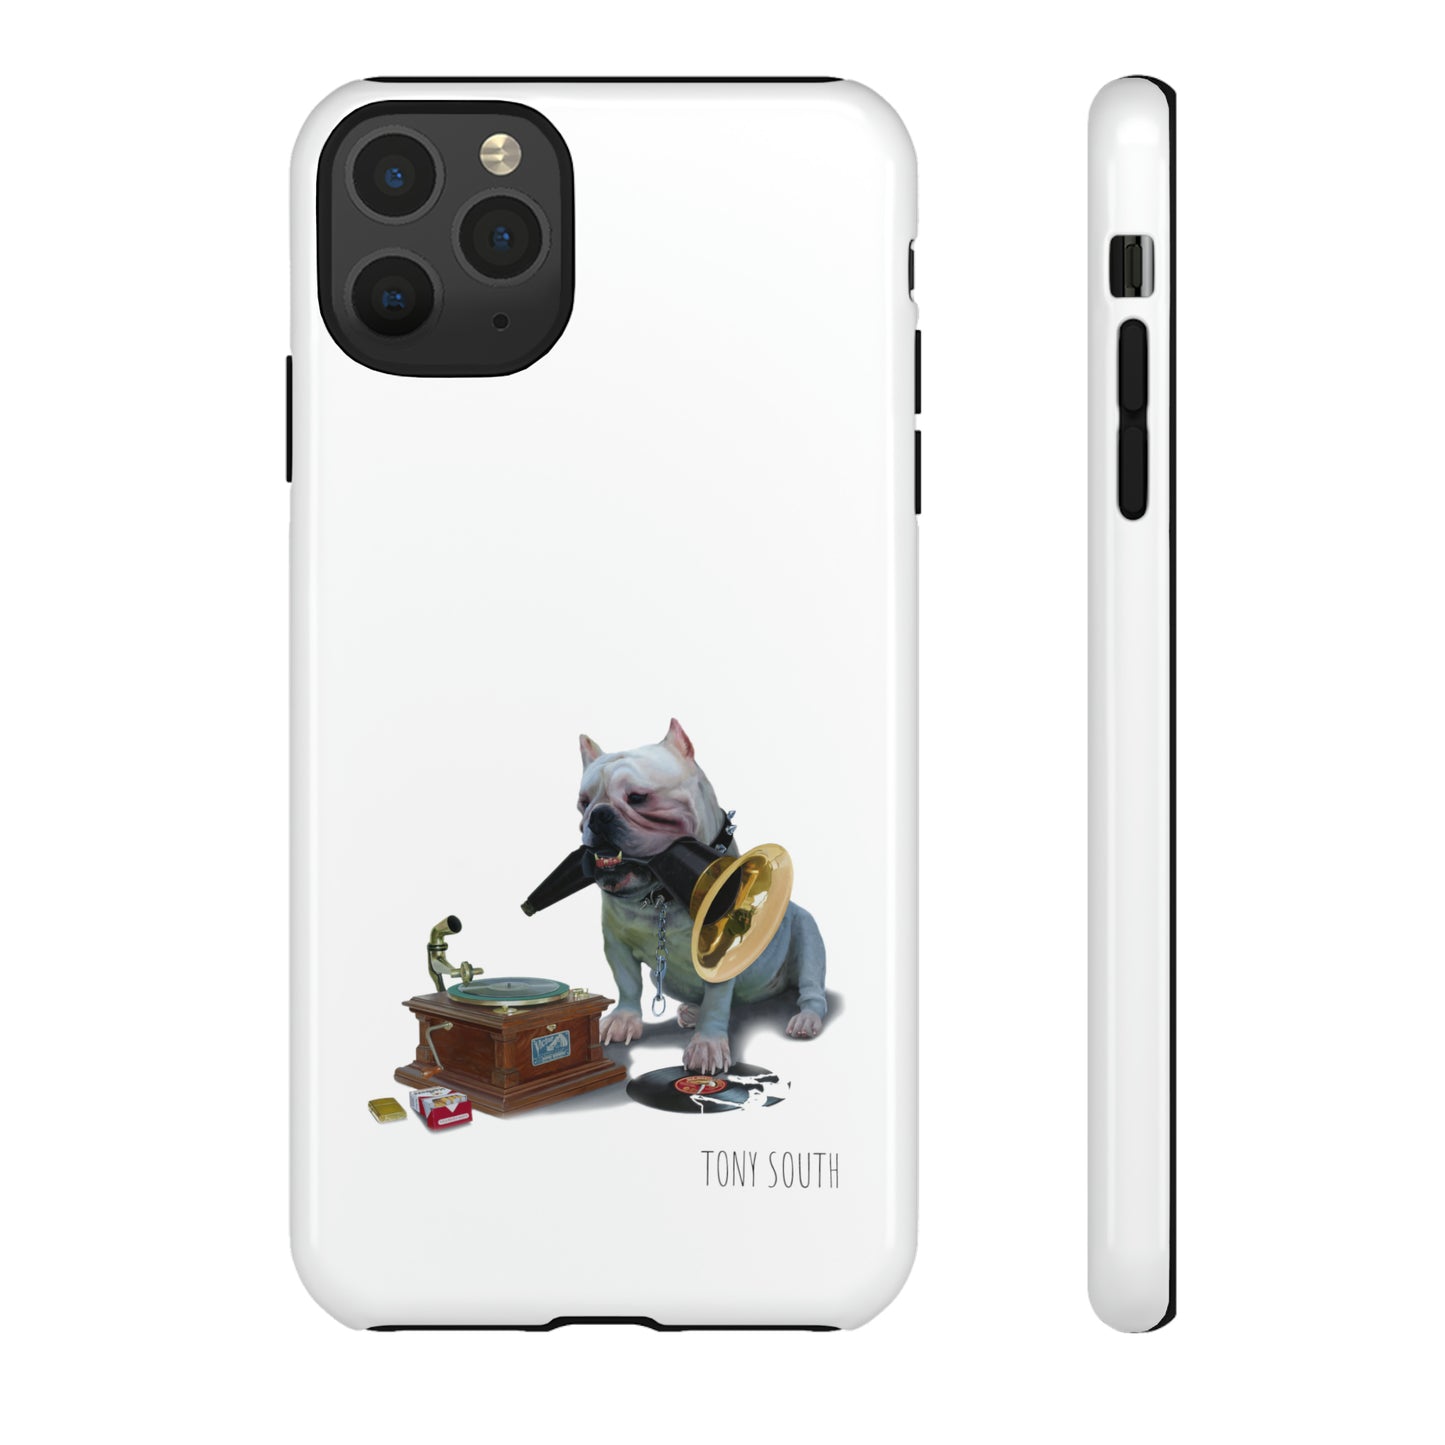 Tony South: "His Master's Voice" - iPhone Tough Cases